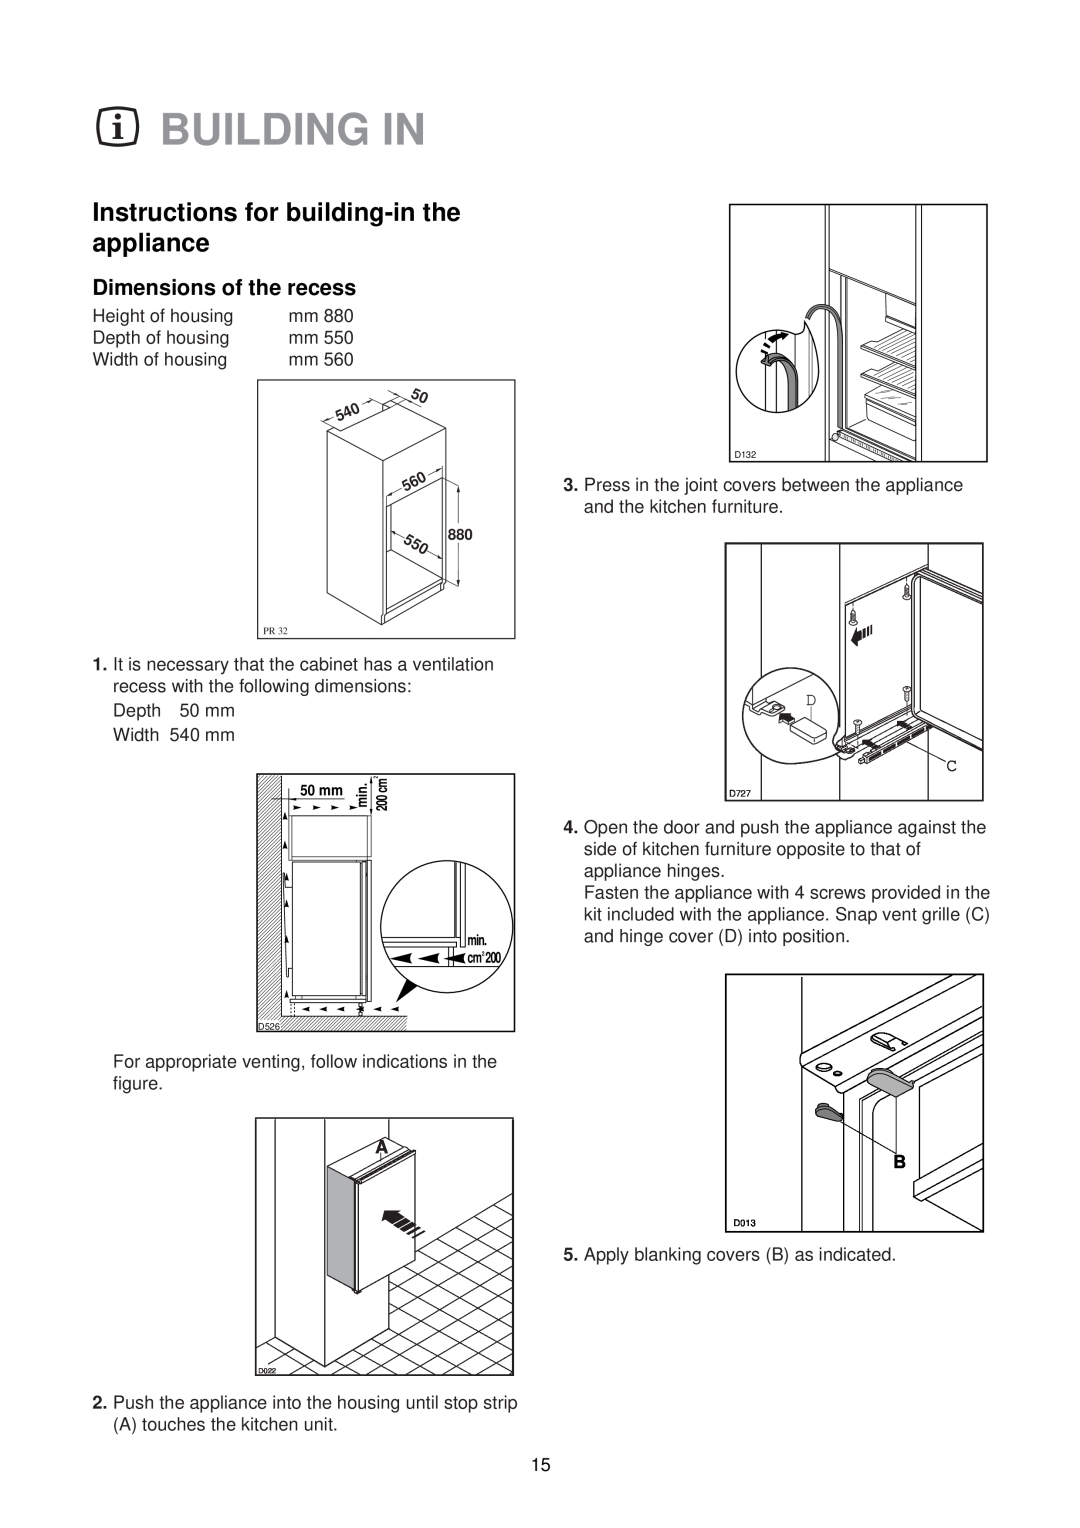 Electrolux EU 6233 manual Building In, Instructions for building-in the appliance, Dimensions of the recess 